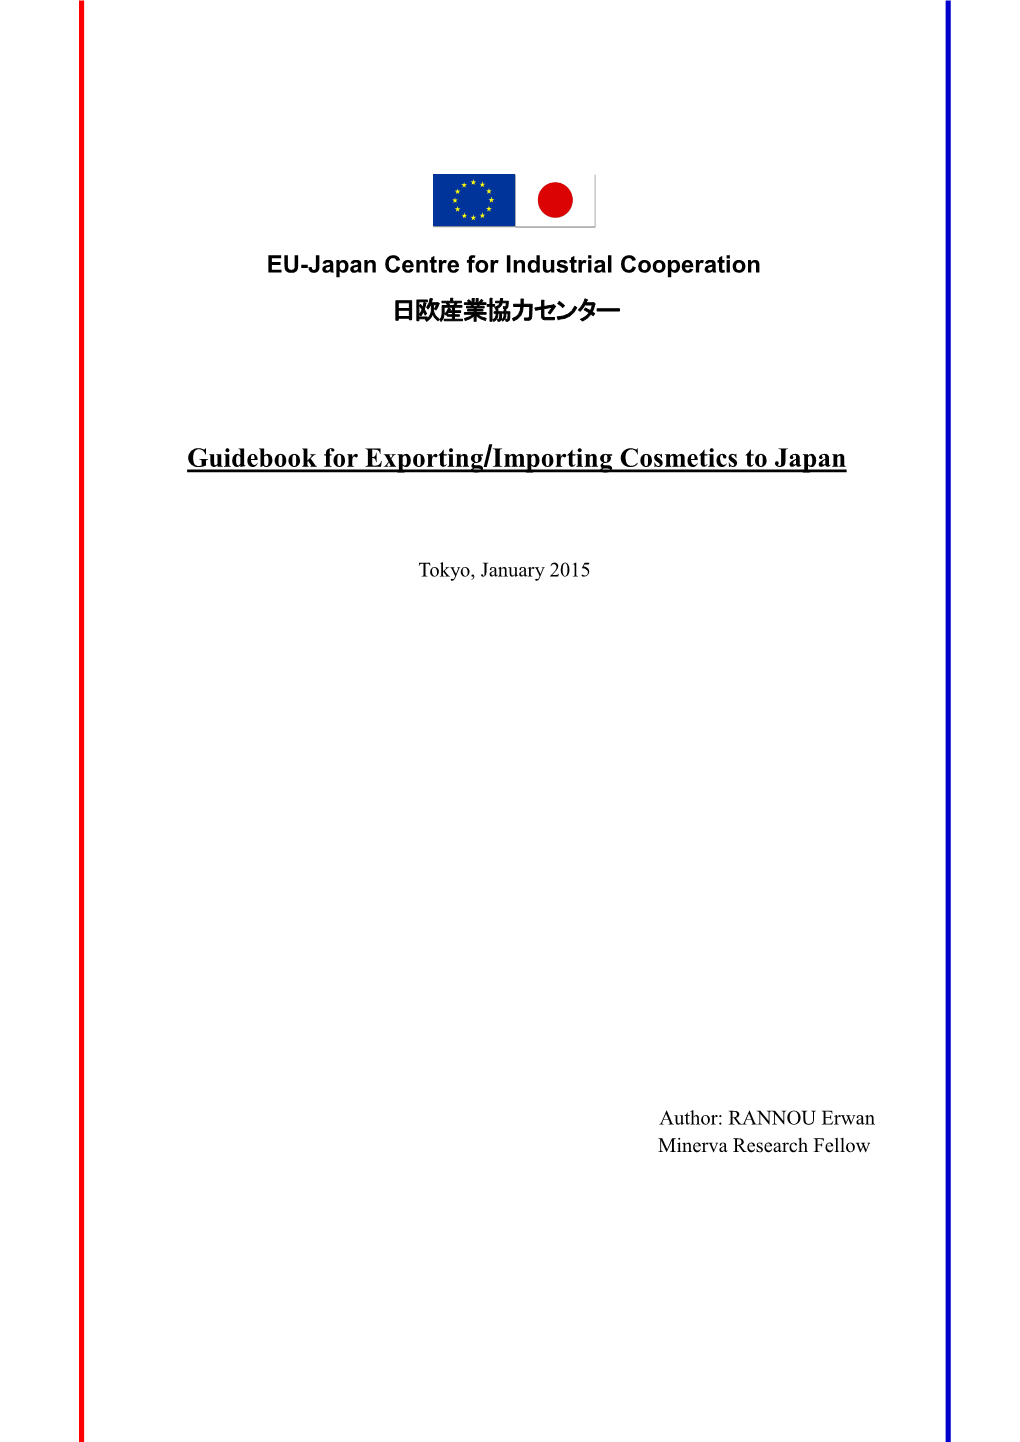 Guidebook for Exporting/Importing Cosmetics to Japan